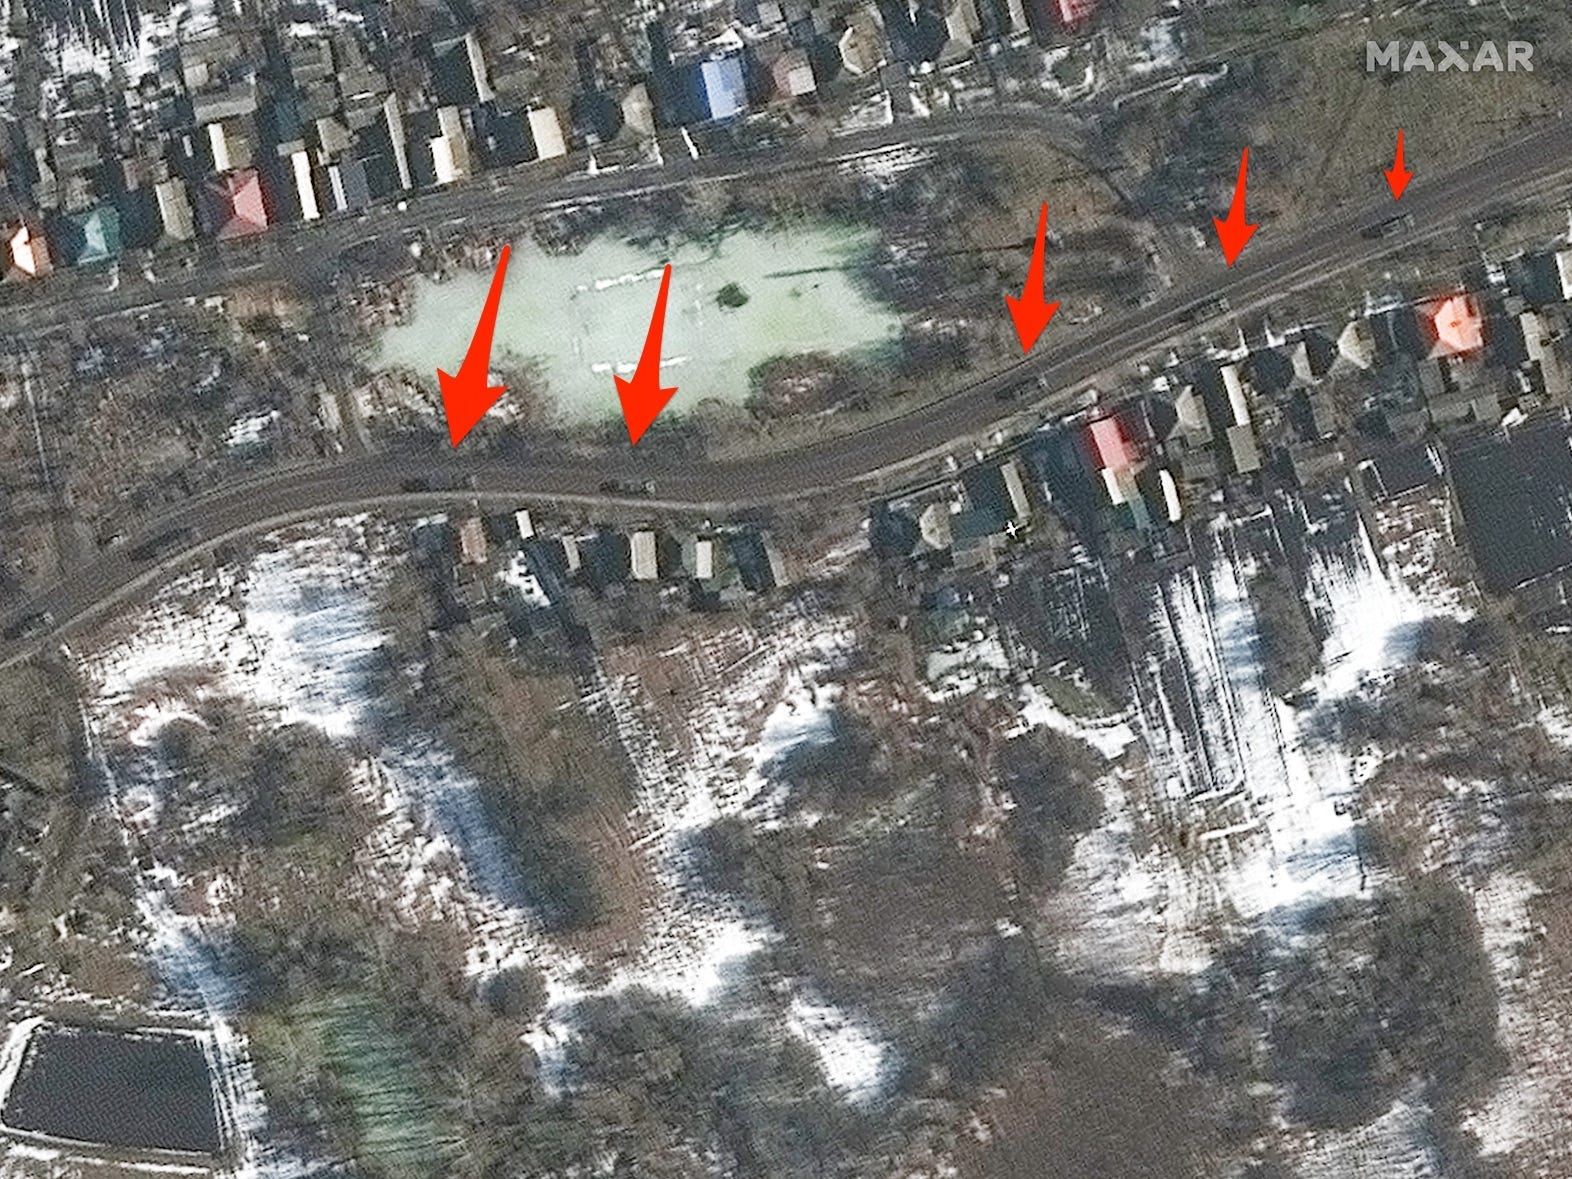 A satellite image shows vehicles on a road among houses with arrows pointing to the vehicles.